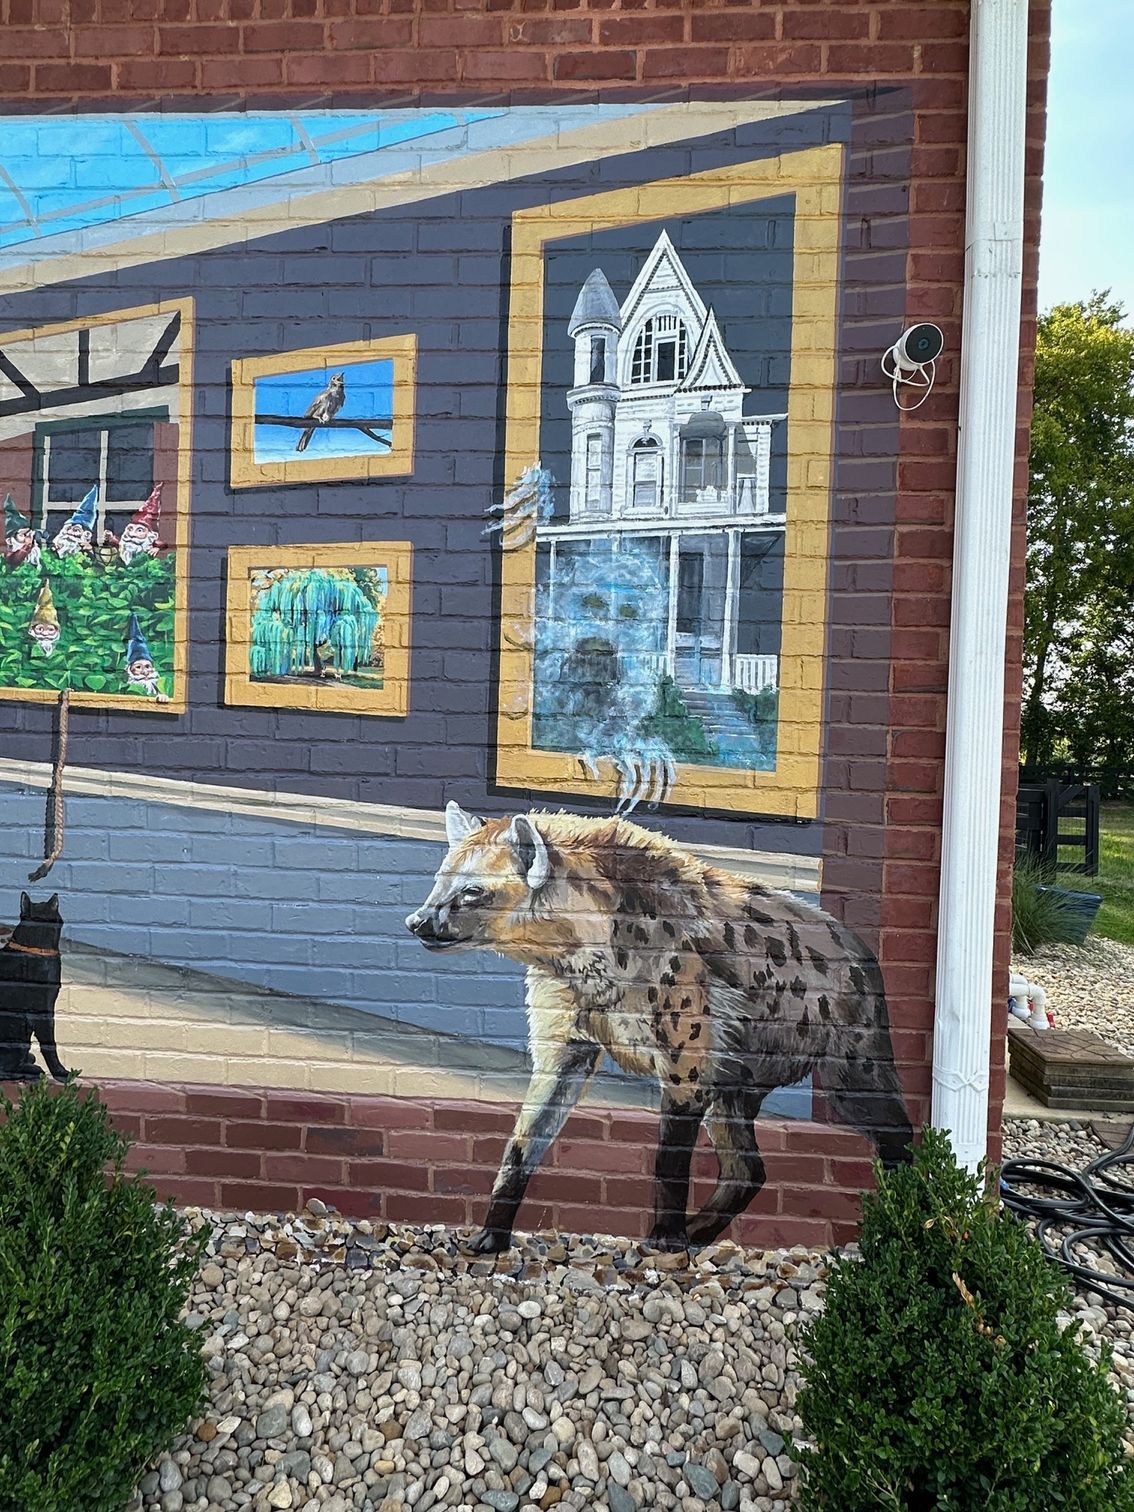 House With Ghost and Hyena of Painting Characters in Her Books Painted on This Exterior Brick Wall - Exterior and Residential Mural Art